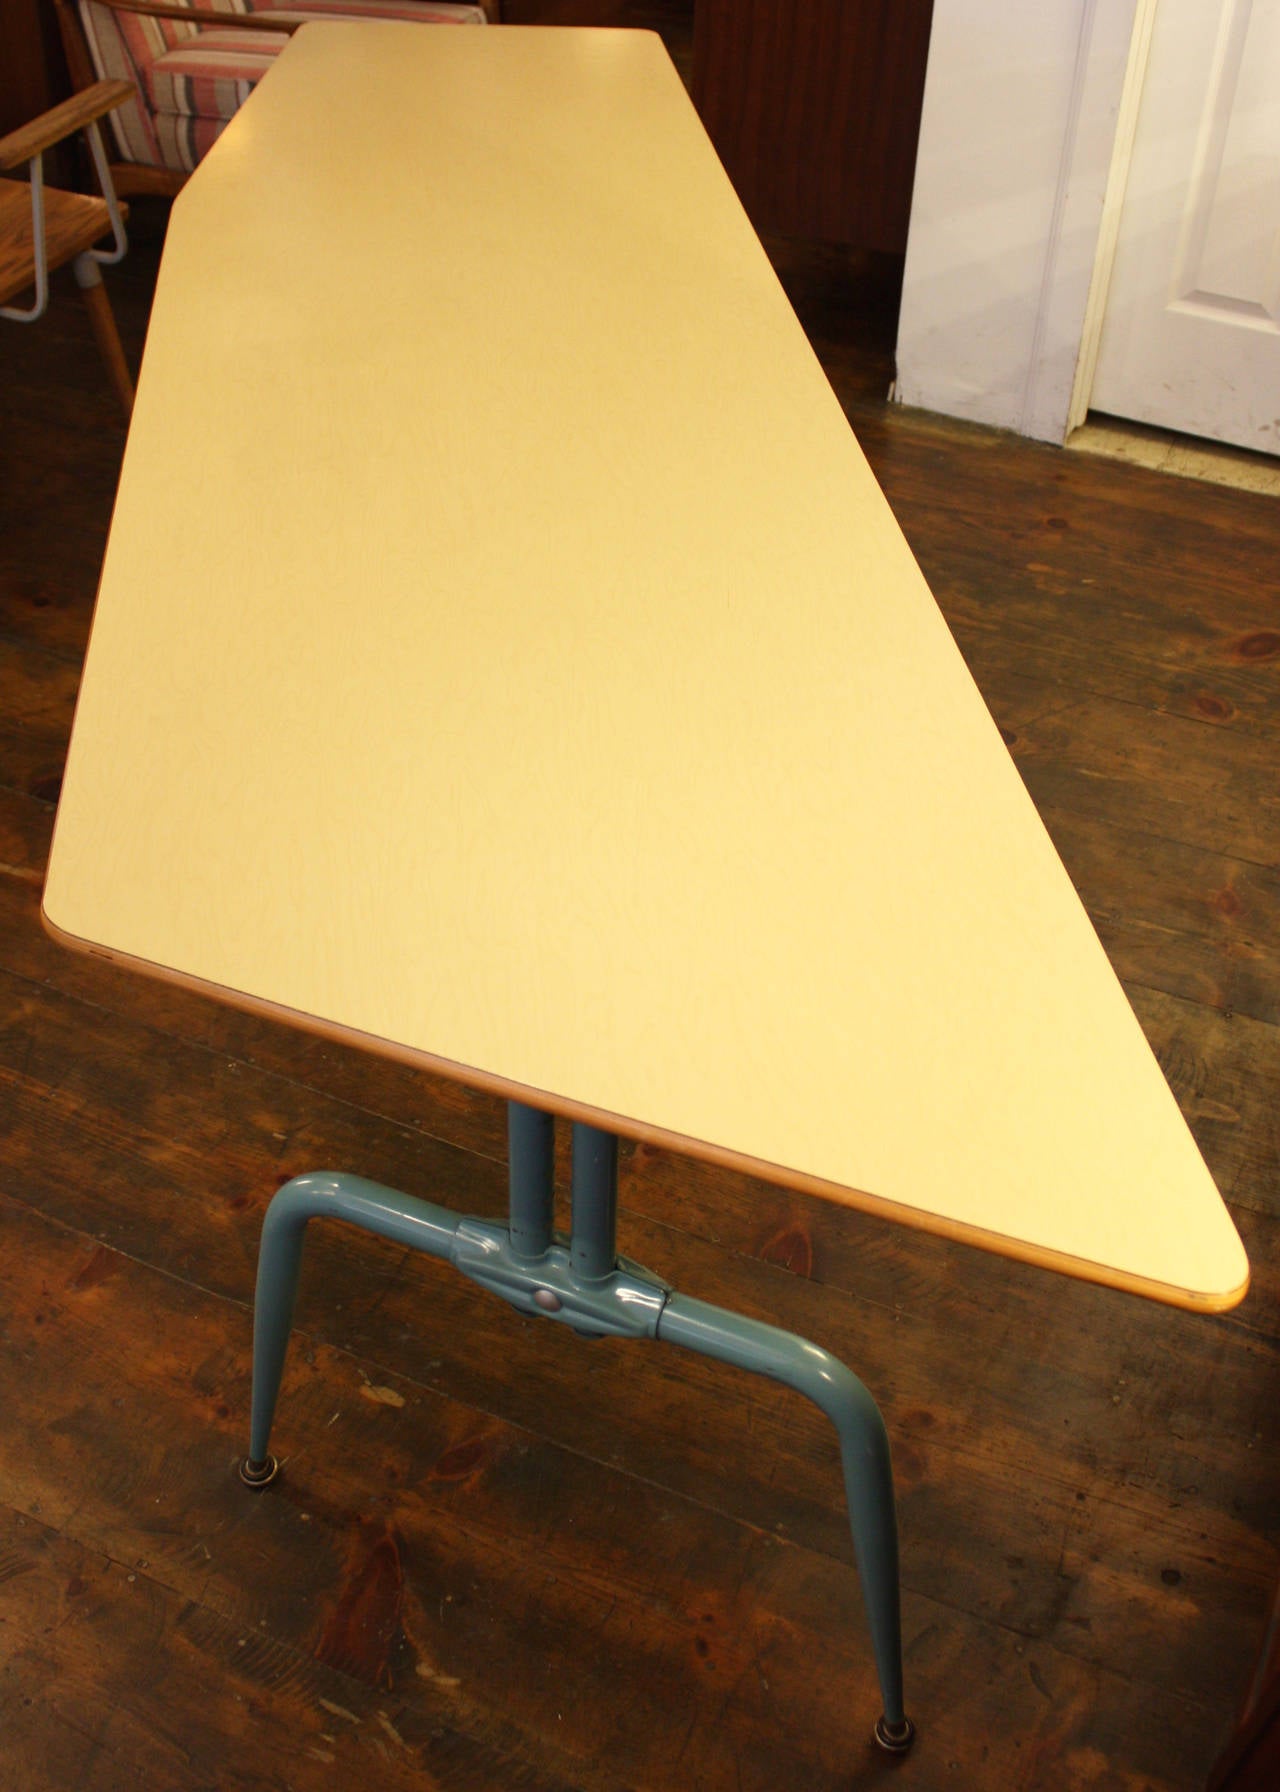 This unique French table is composed of a laminated plywood, asymmetrical top supported by enameled-steel bases which are adjustable. This versatile table can be used as a dining, conference, or writing table. The table bases are flared out in